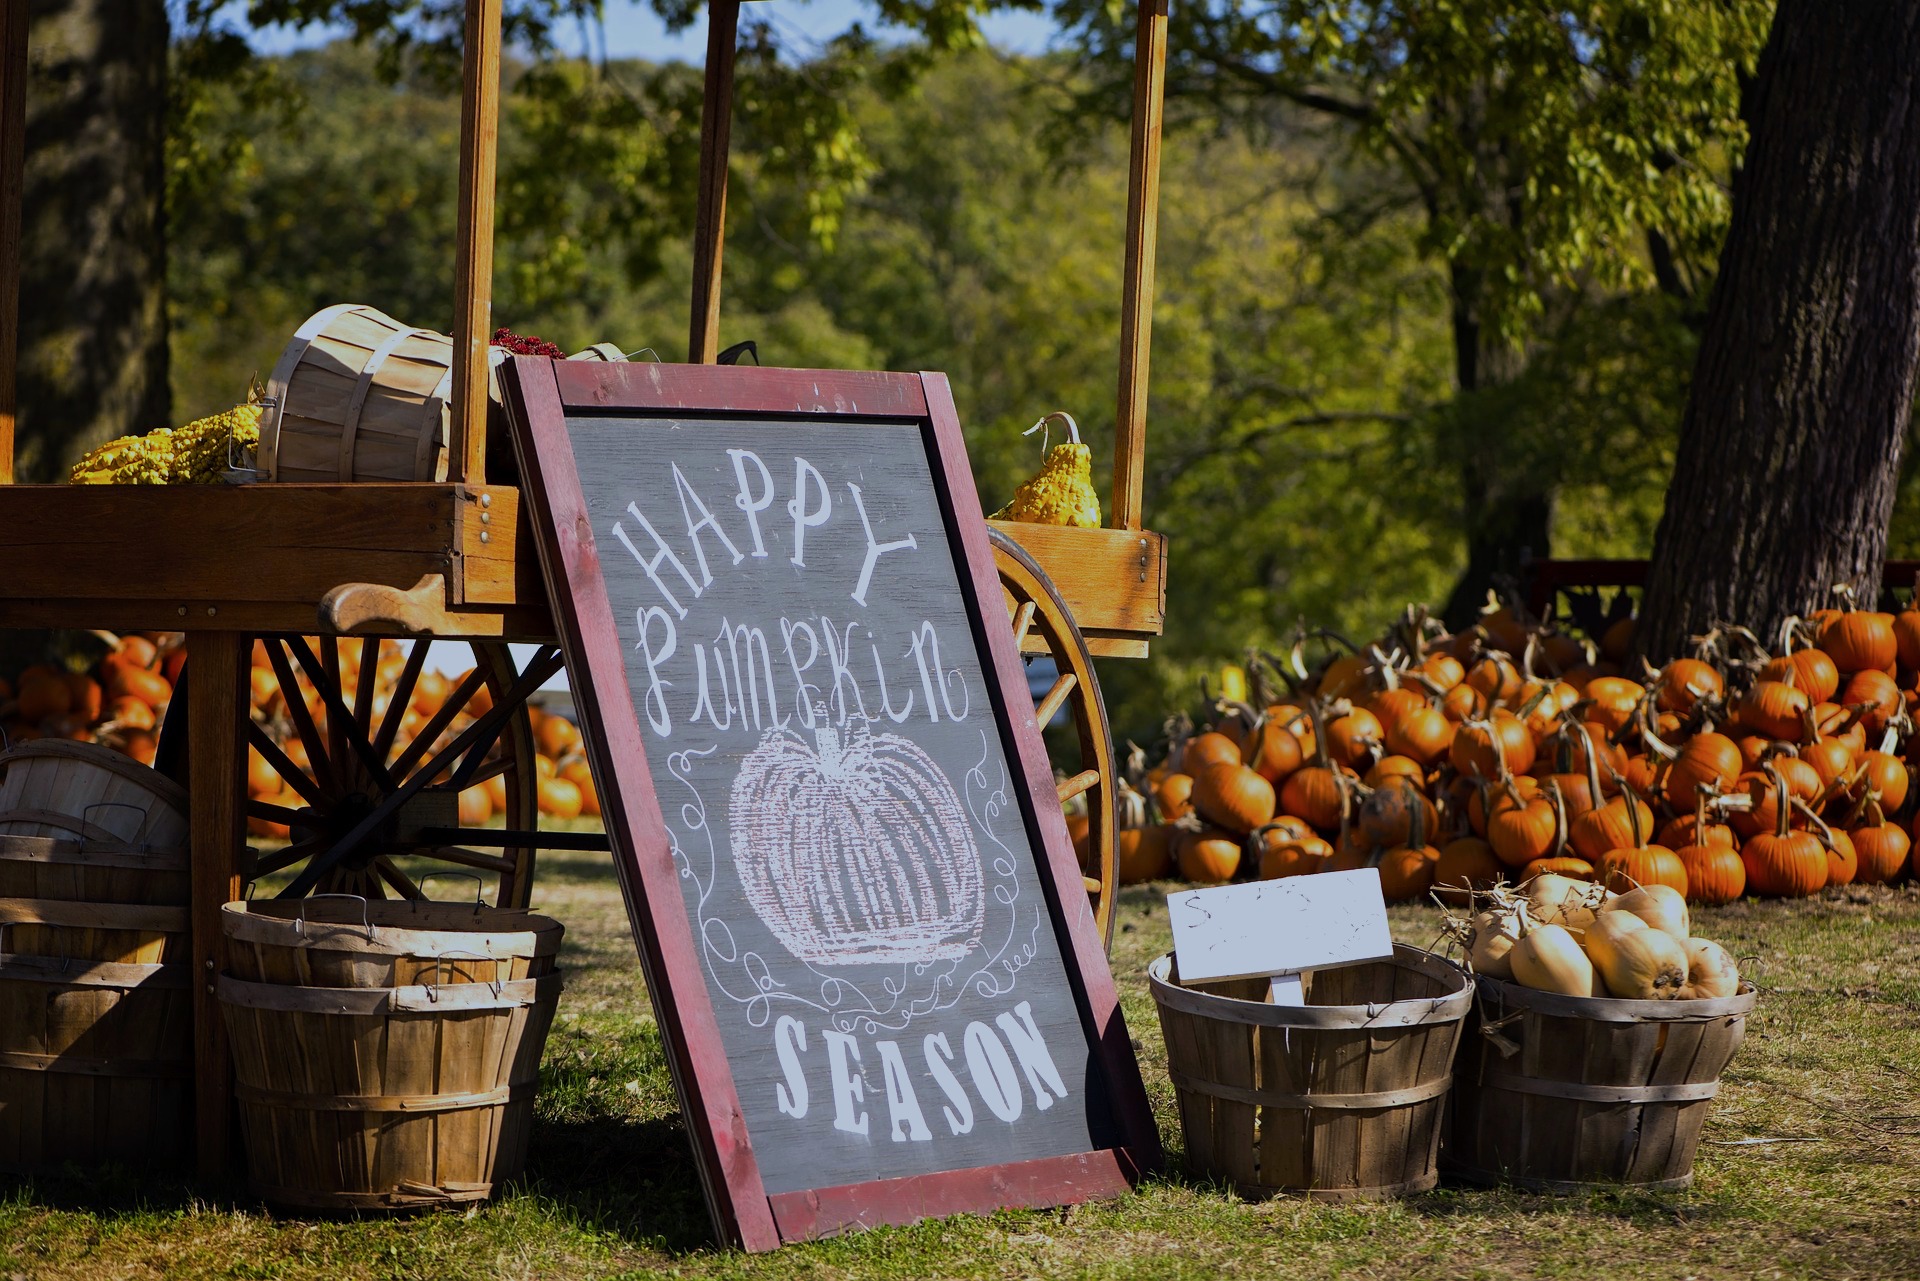 Image of a pumpkin patch with a chalkboard sign and baskets of pumpkins.